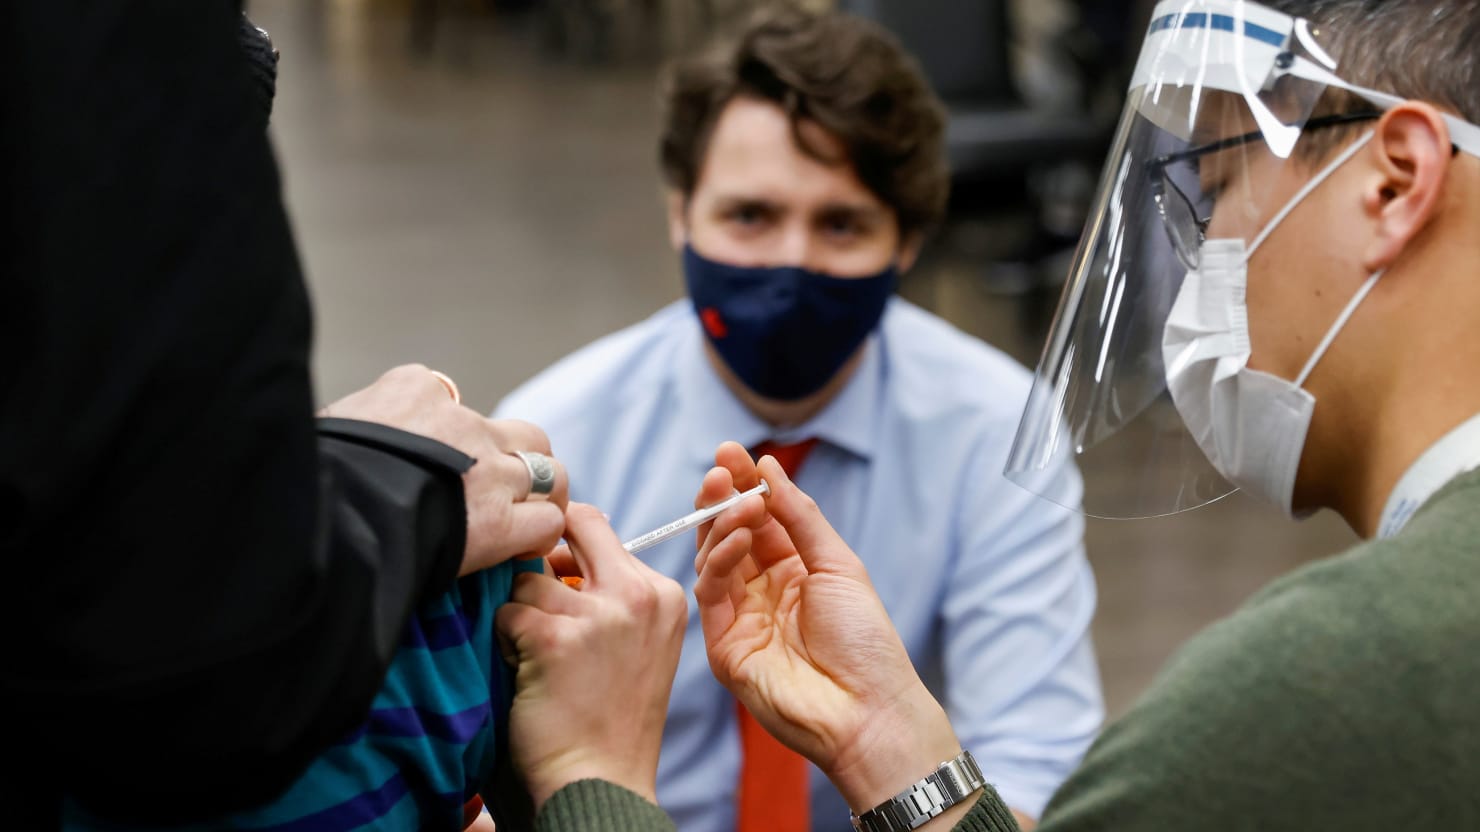 Millions are locked up again due to failure of vaccination by Canada